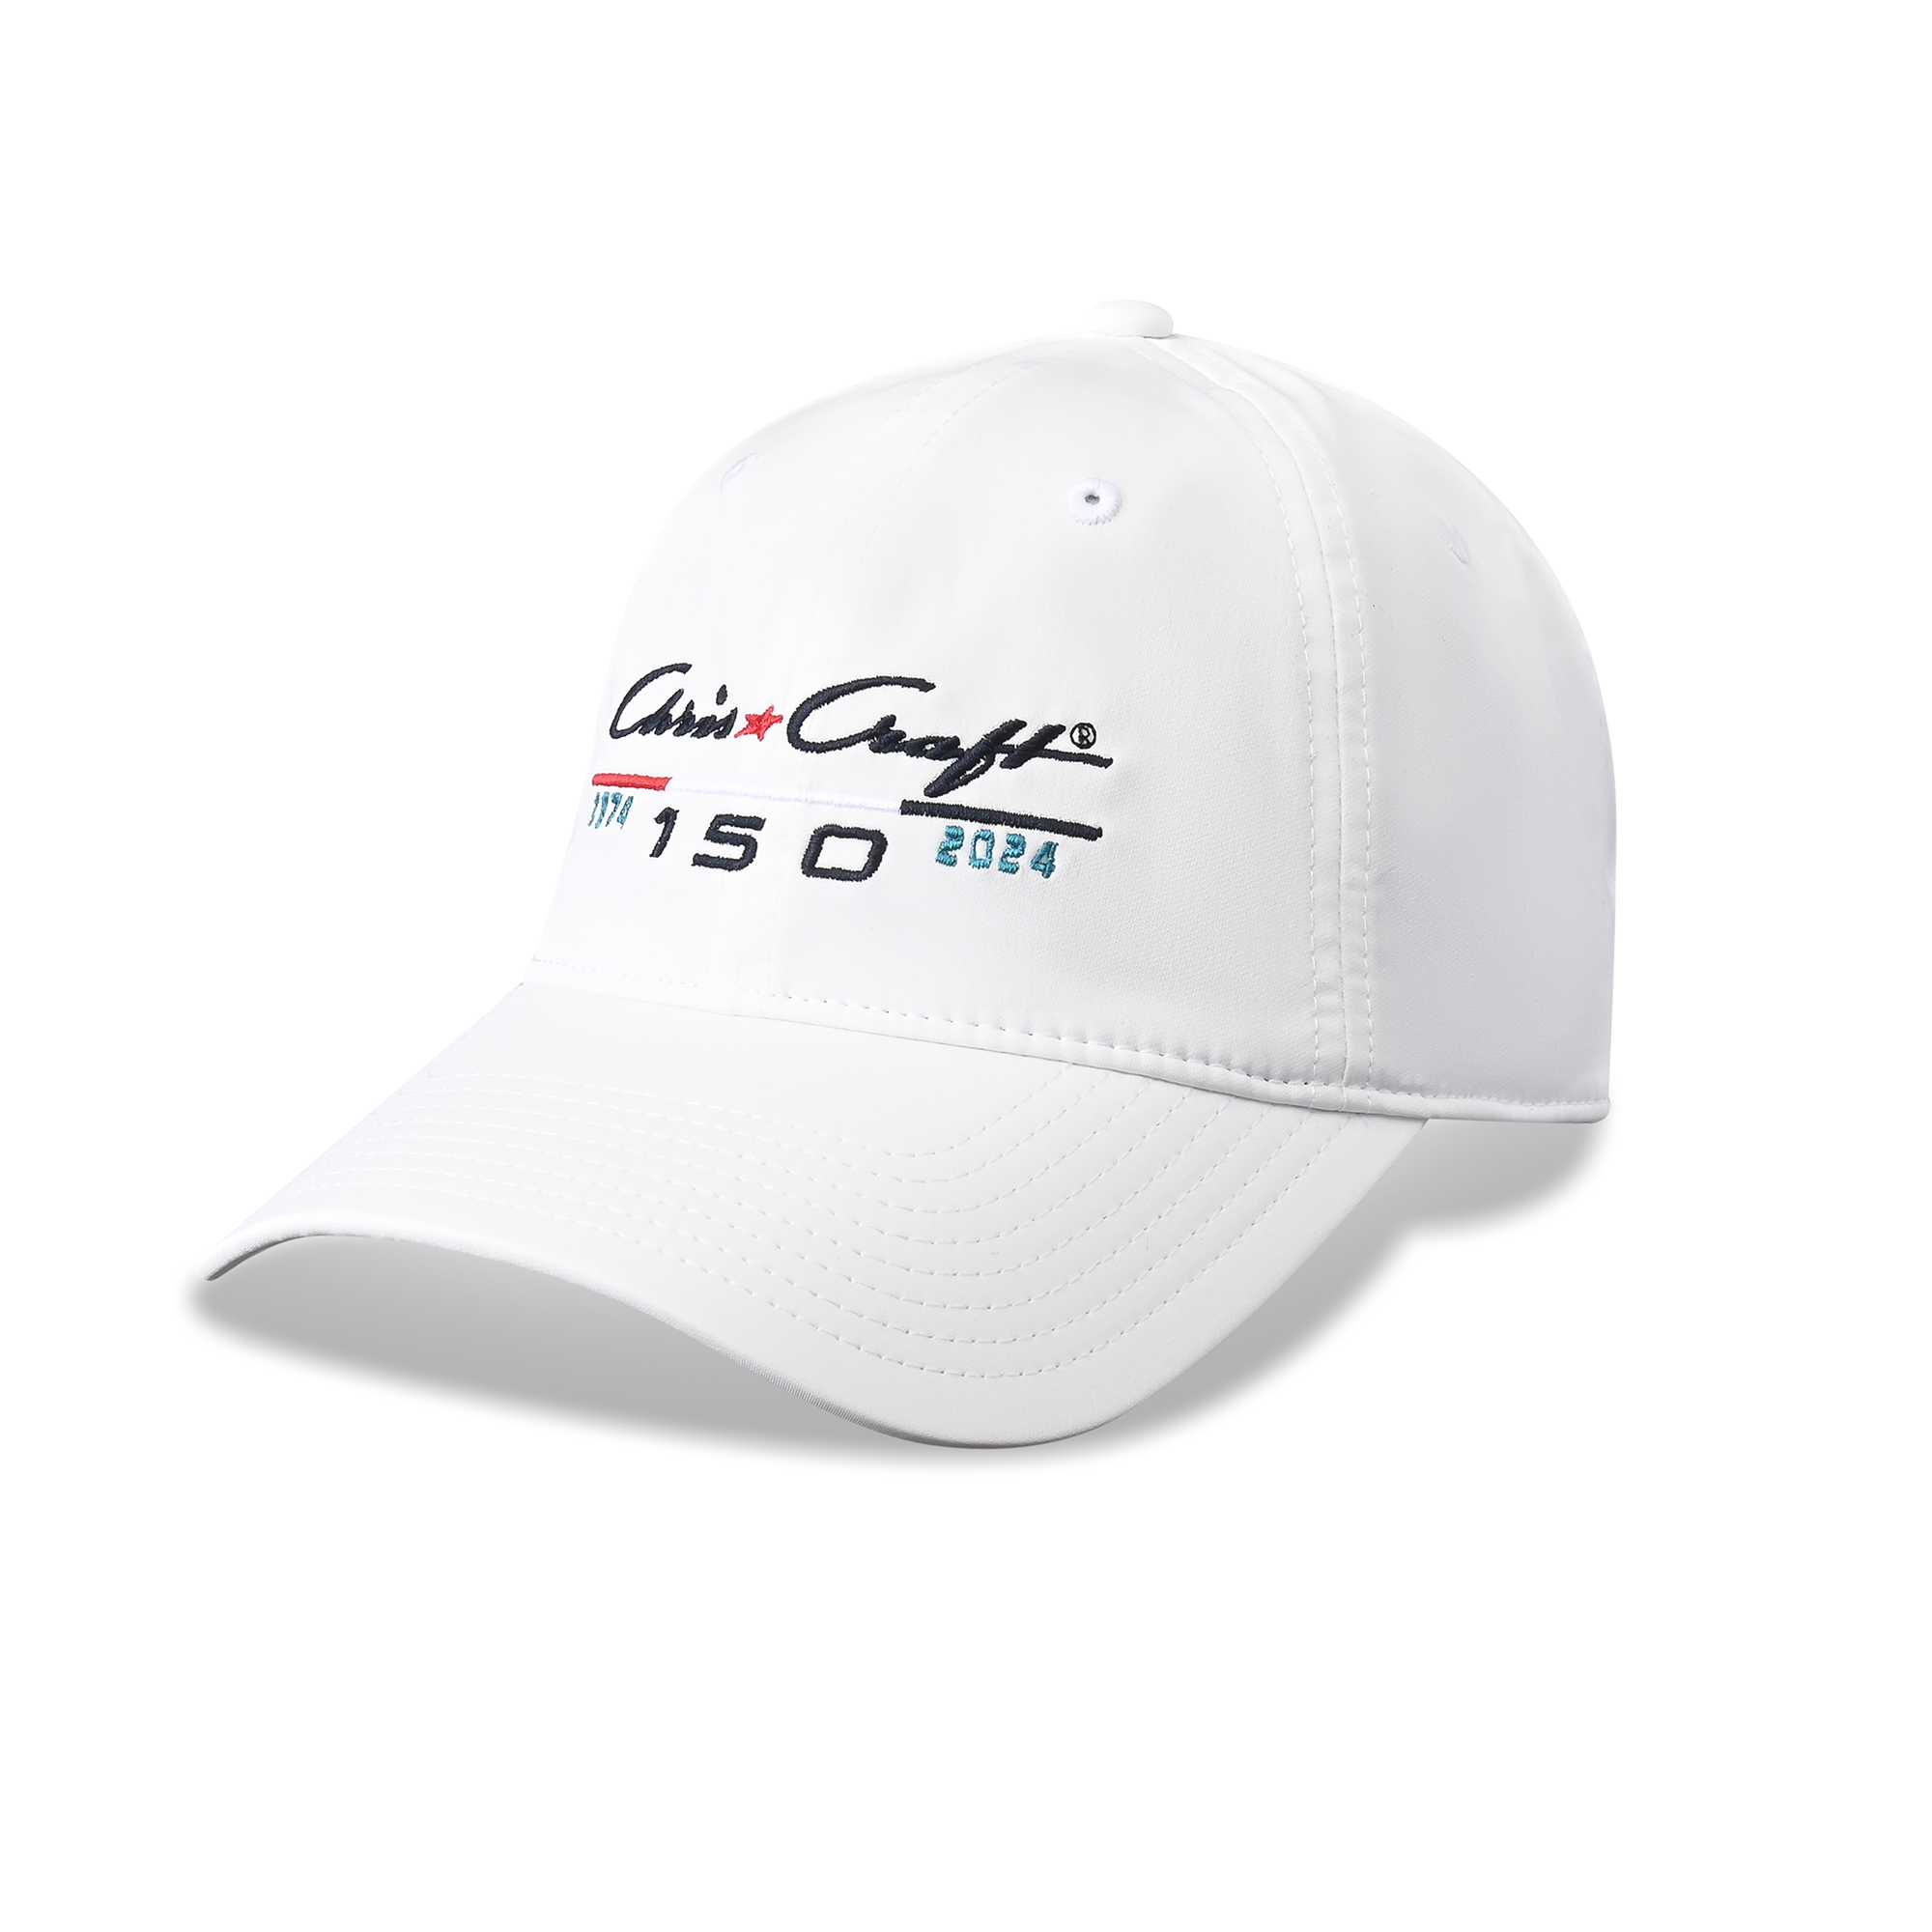 Limited Edition 150th Anniversary 1874 Performance Cap